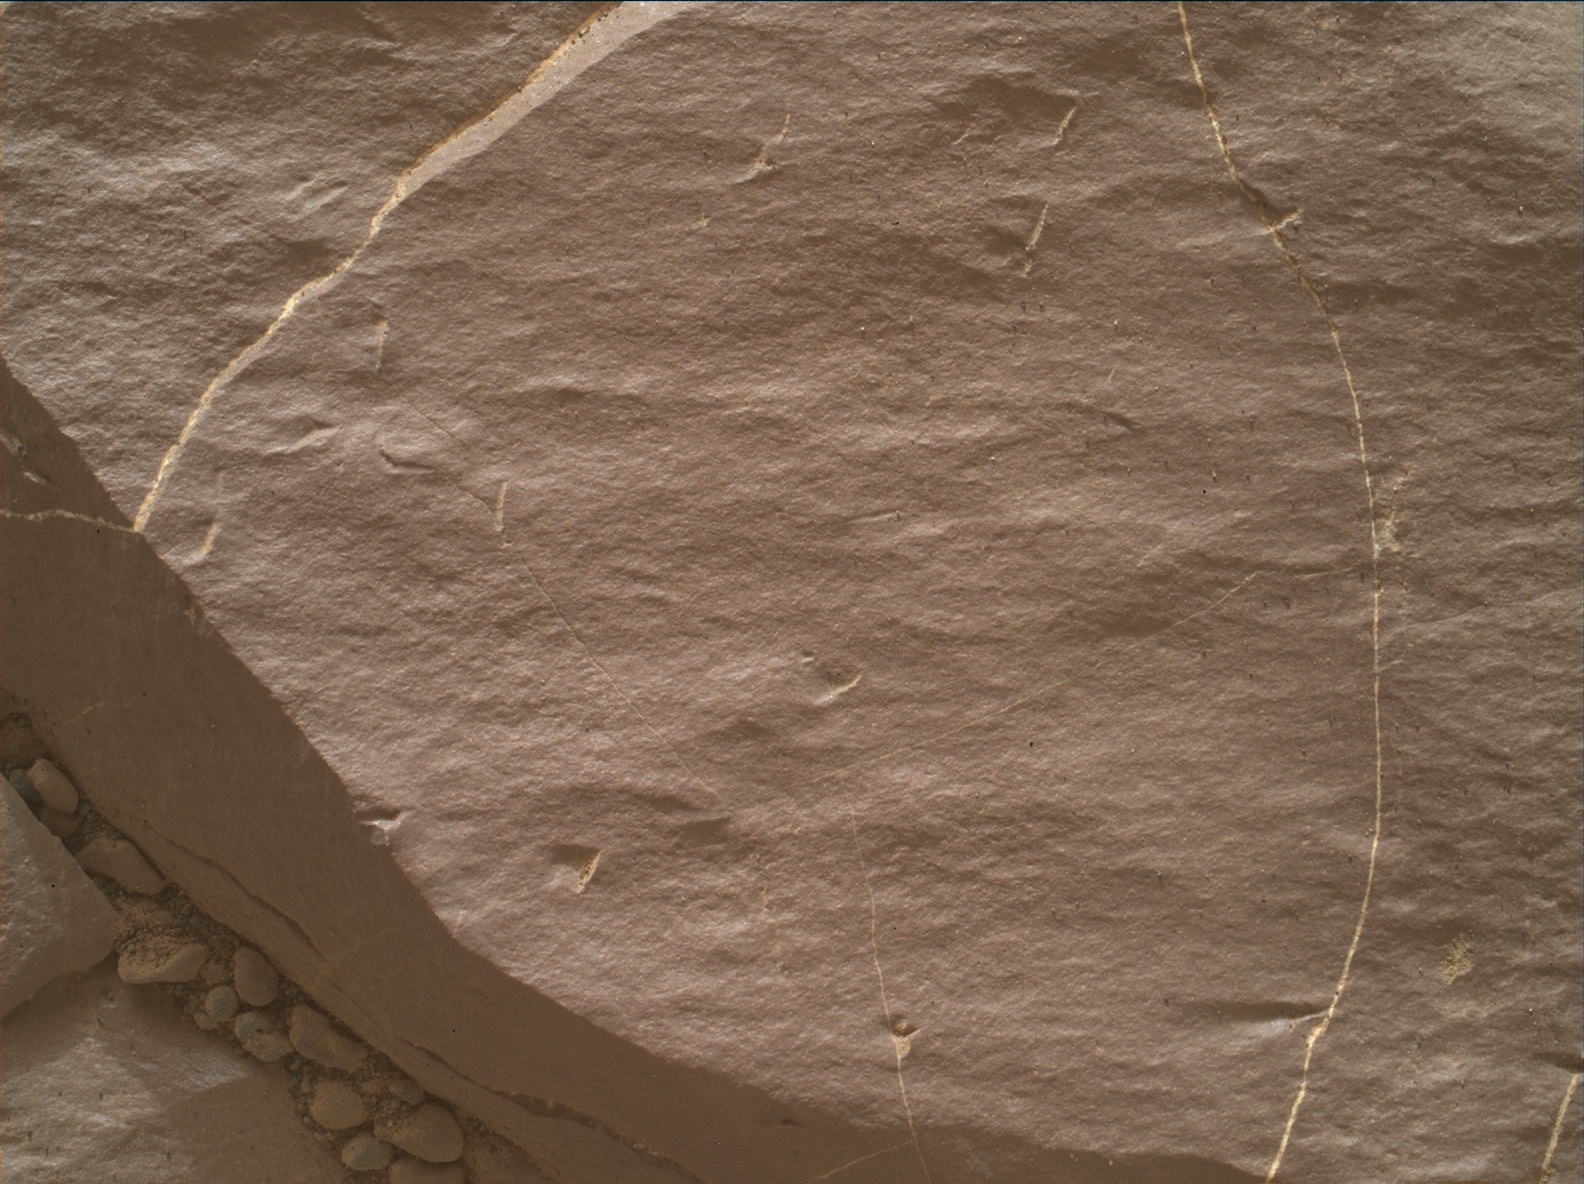 Nasa's Mars rover Curiosity acquired this image using its Mars Hand Lens Imager (MAHLI) on Sol 2255